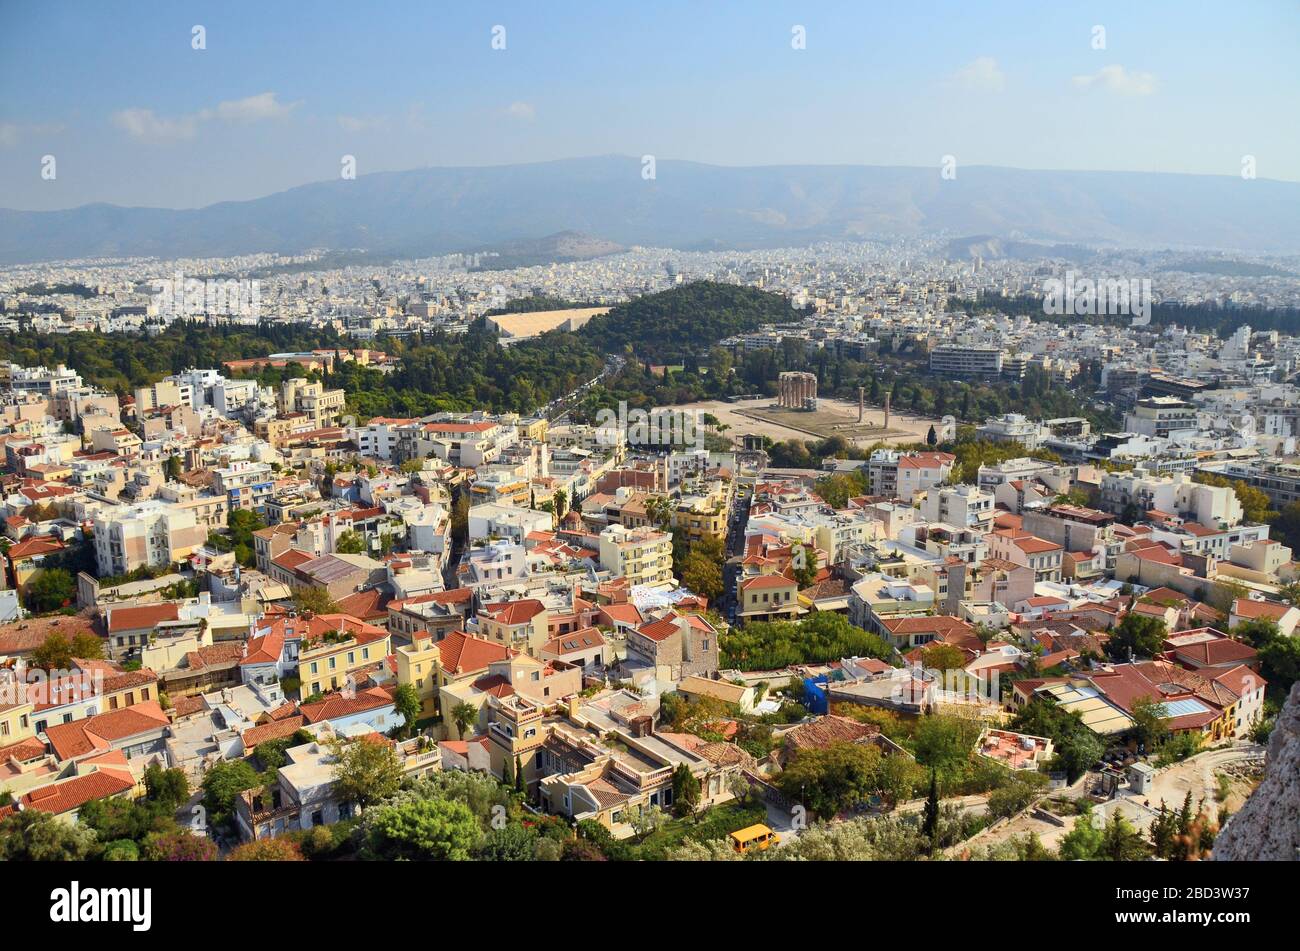 view from the Acropolis of athens looking below to the city including the ancient temple of Olympian Zeus. Stock Photo